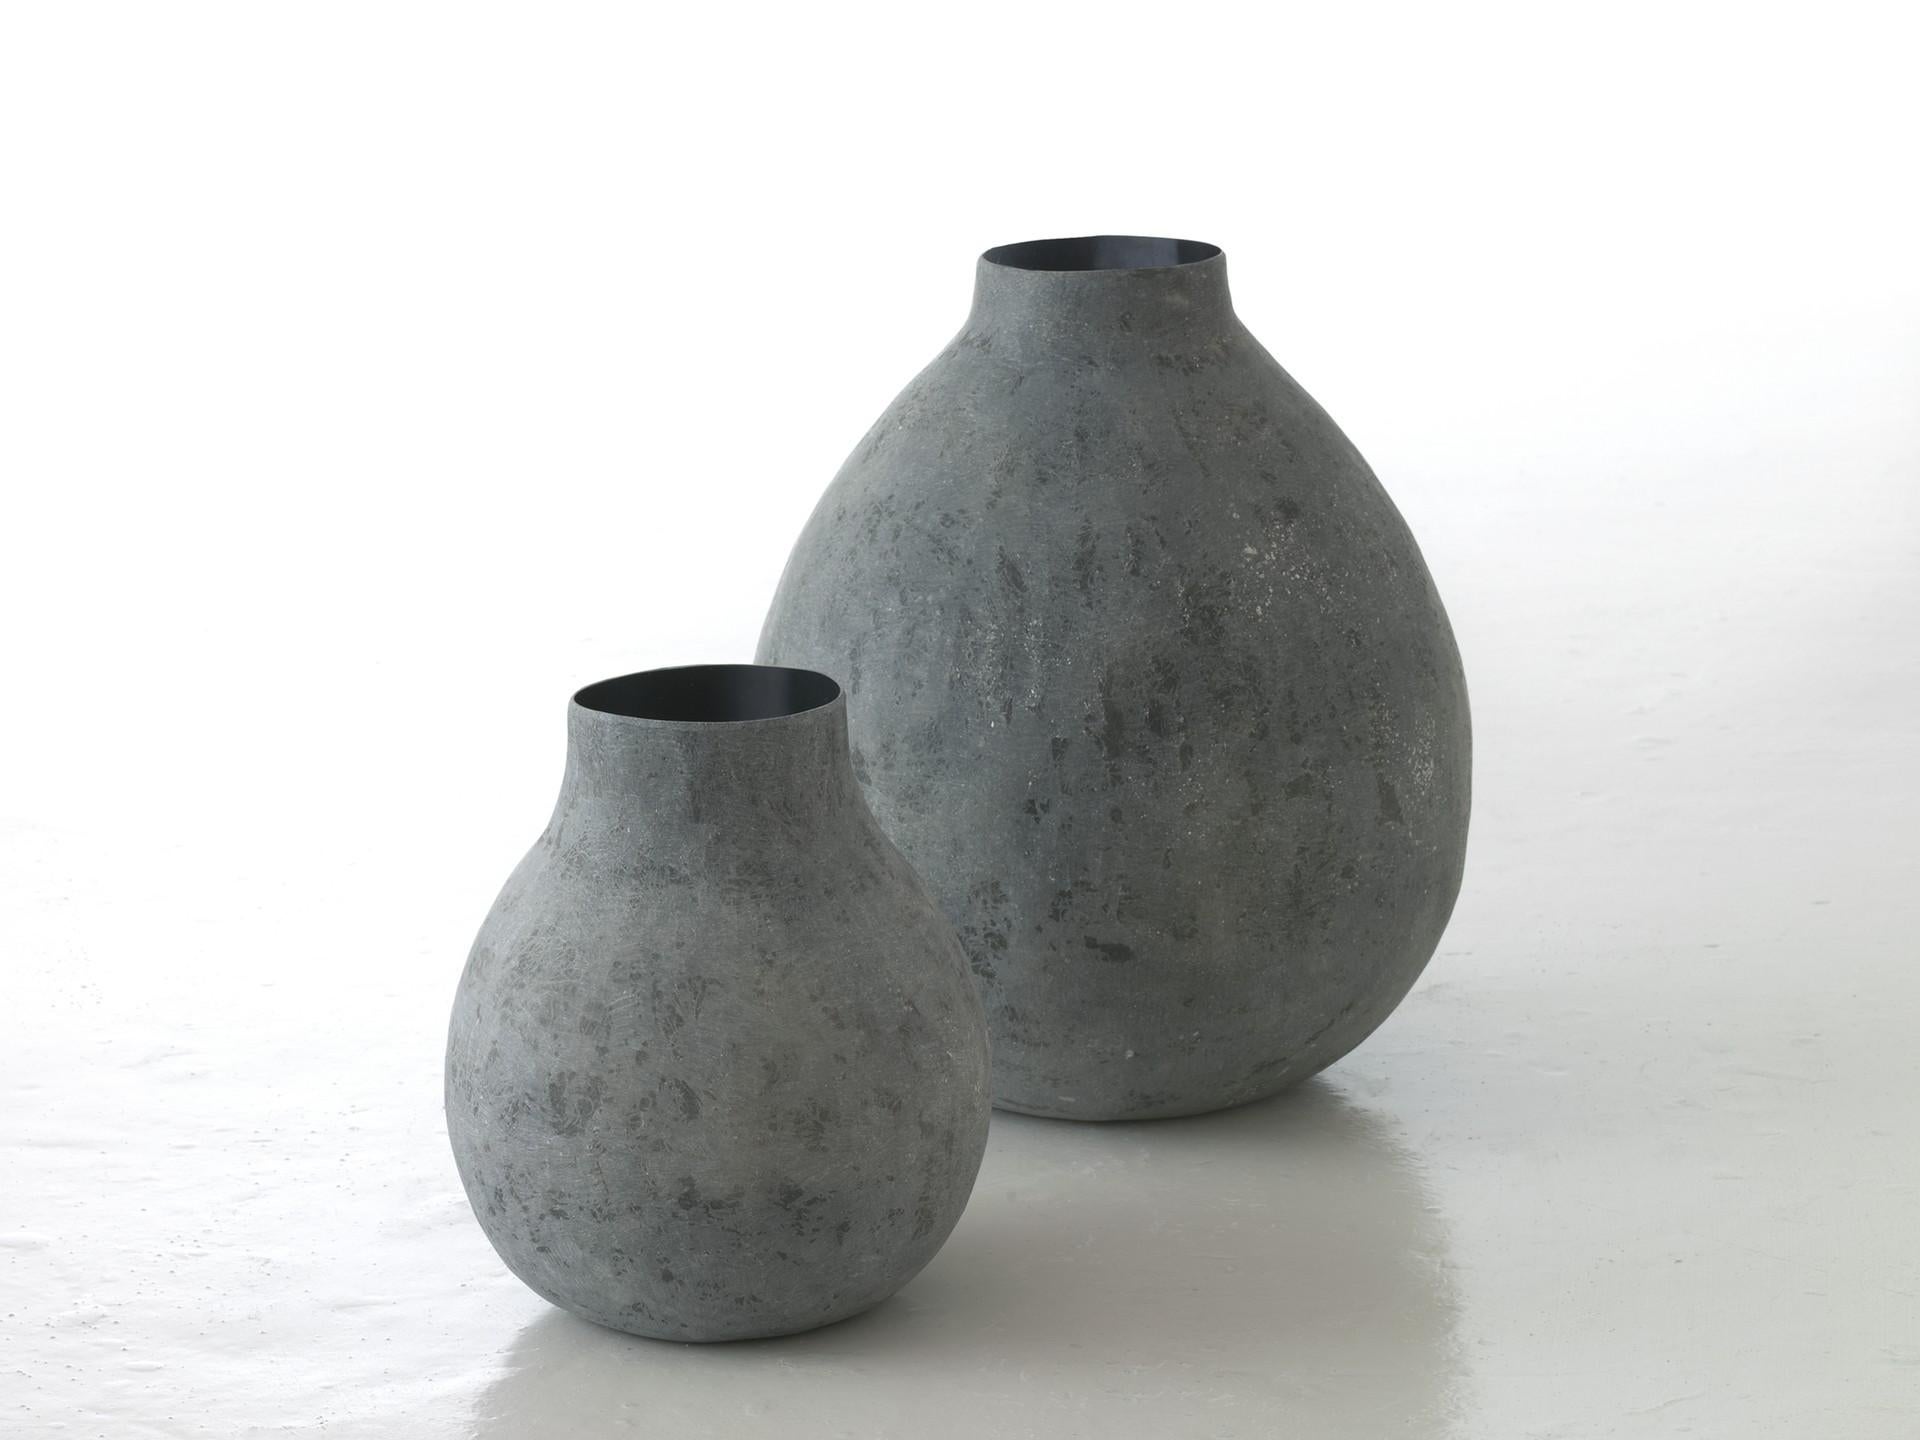 Pair of Bulbo Vases by Imperfettolab
Dimensions: 
Ø 38 x H 45 cm
Ø 32 x H 42 cm
Materials: raw material


Imperfetto Lab
Who we are ? We are a family.
Verter Turroni, Emanuela Ravelli and our children Elia, Margherita and Eusebio.
All